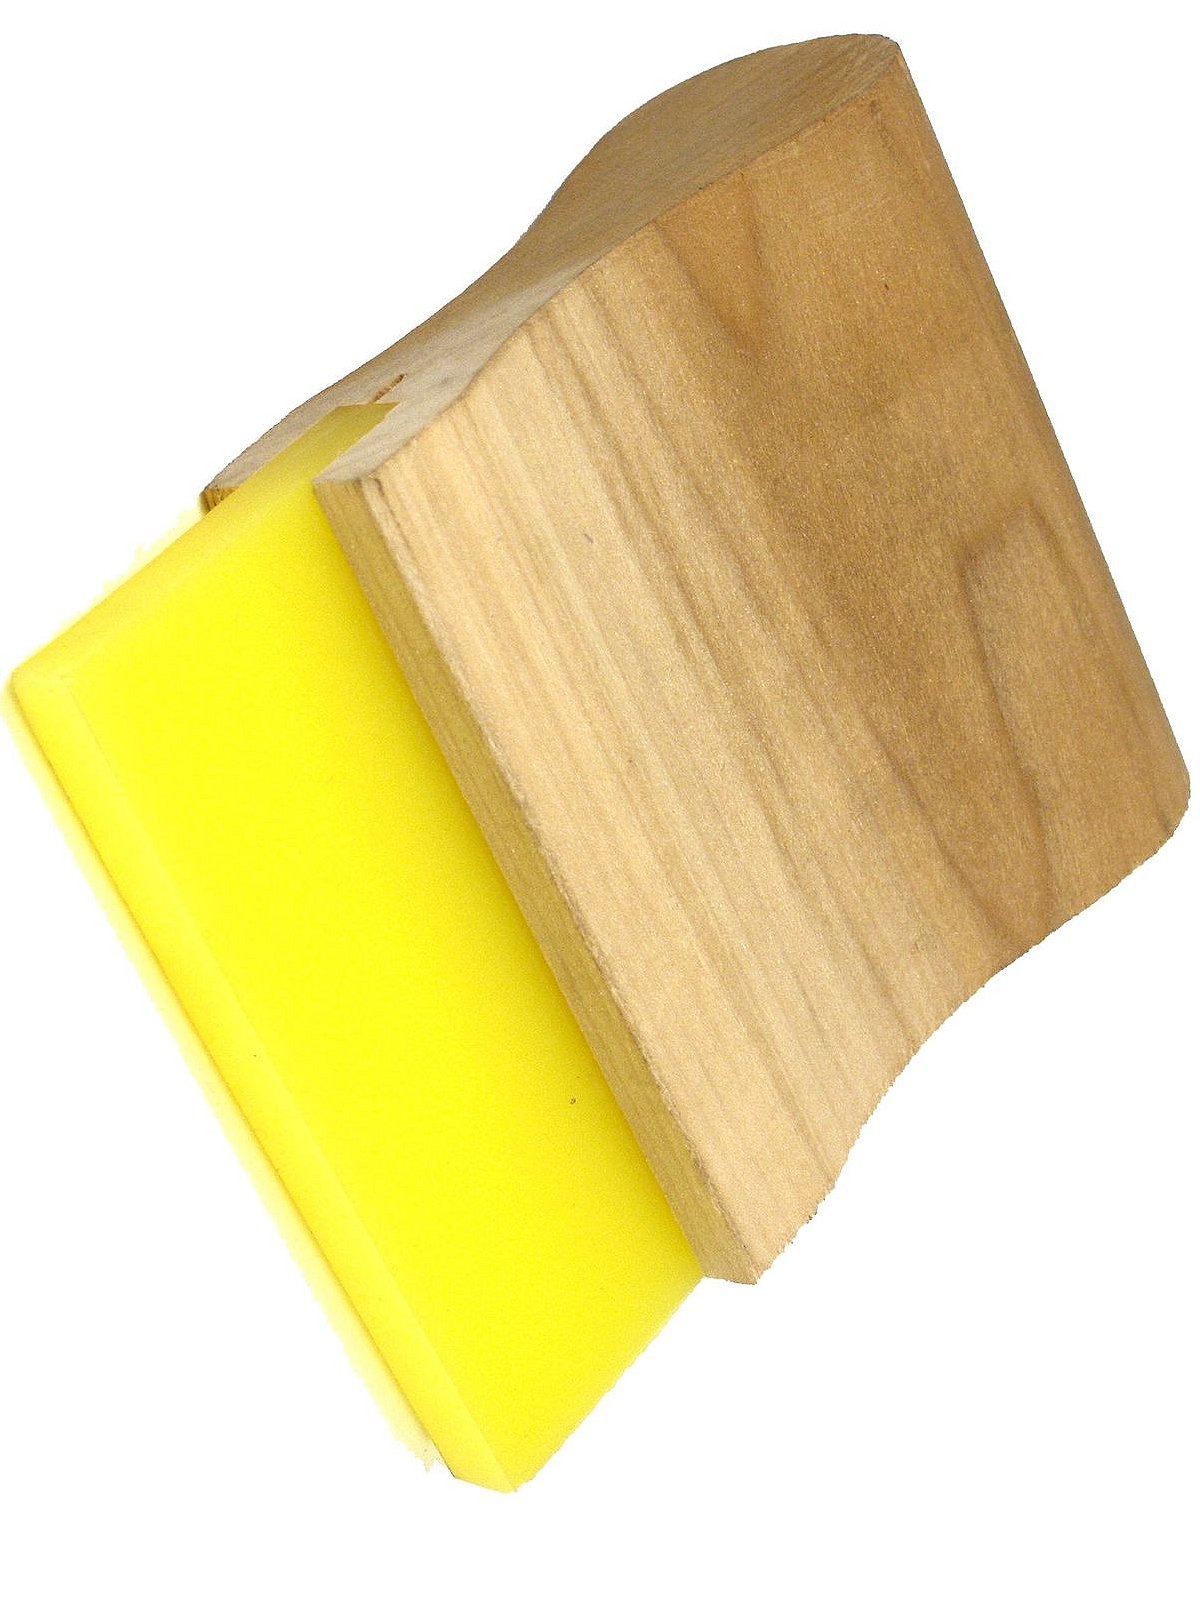 Screen Printing Squeegee Art Board Print for Sale by murialbezanson